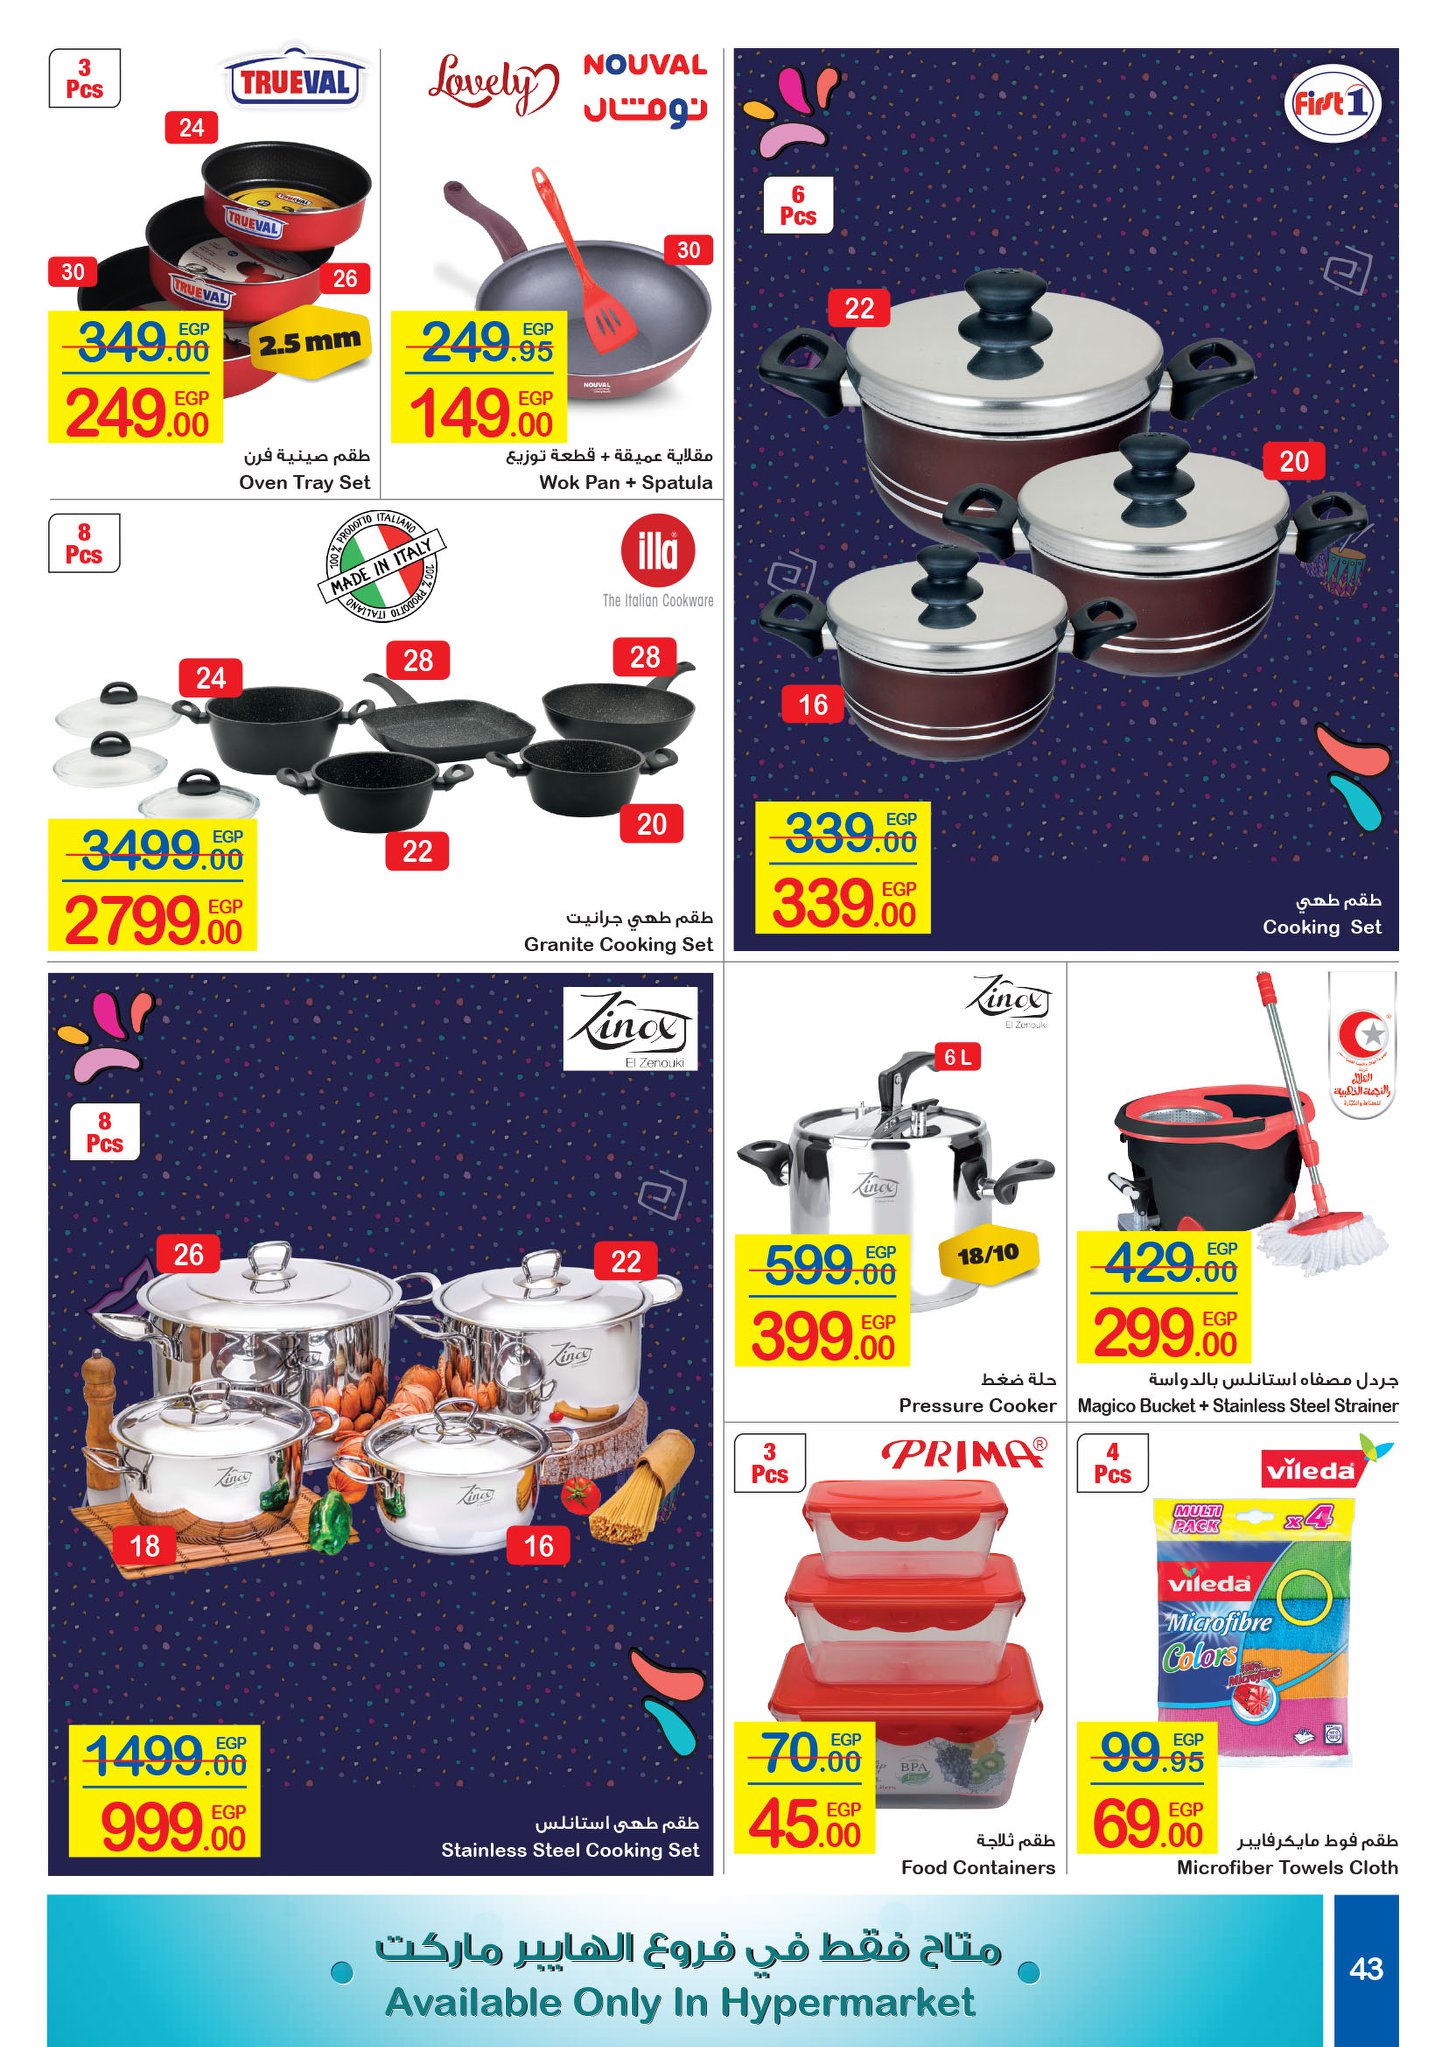 Carrefour Flyer from 16/7 till 27/7 | Carrefour Egypt 42